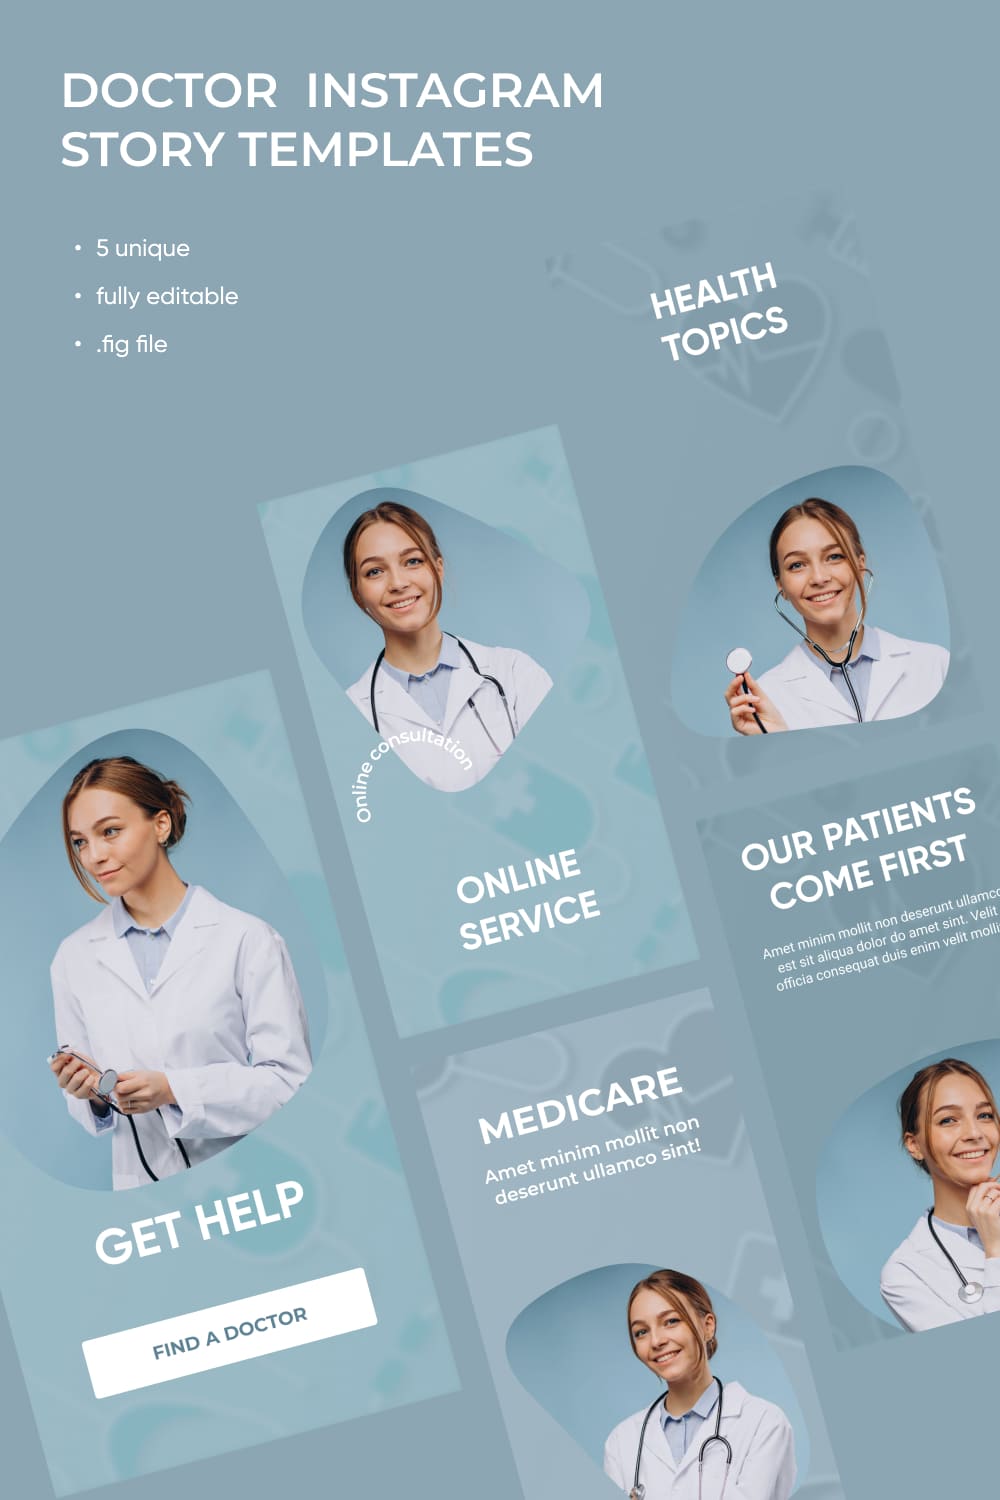 09 5 doctor instagram story templates 1100 1100